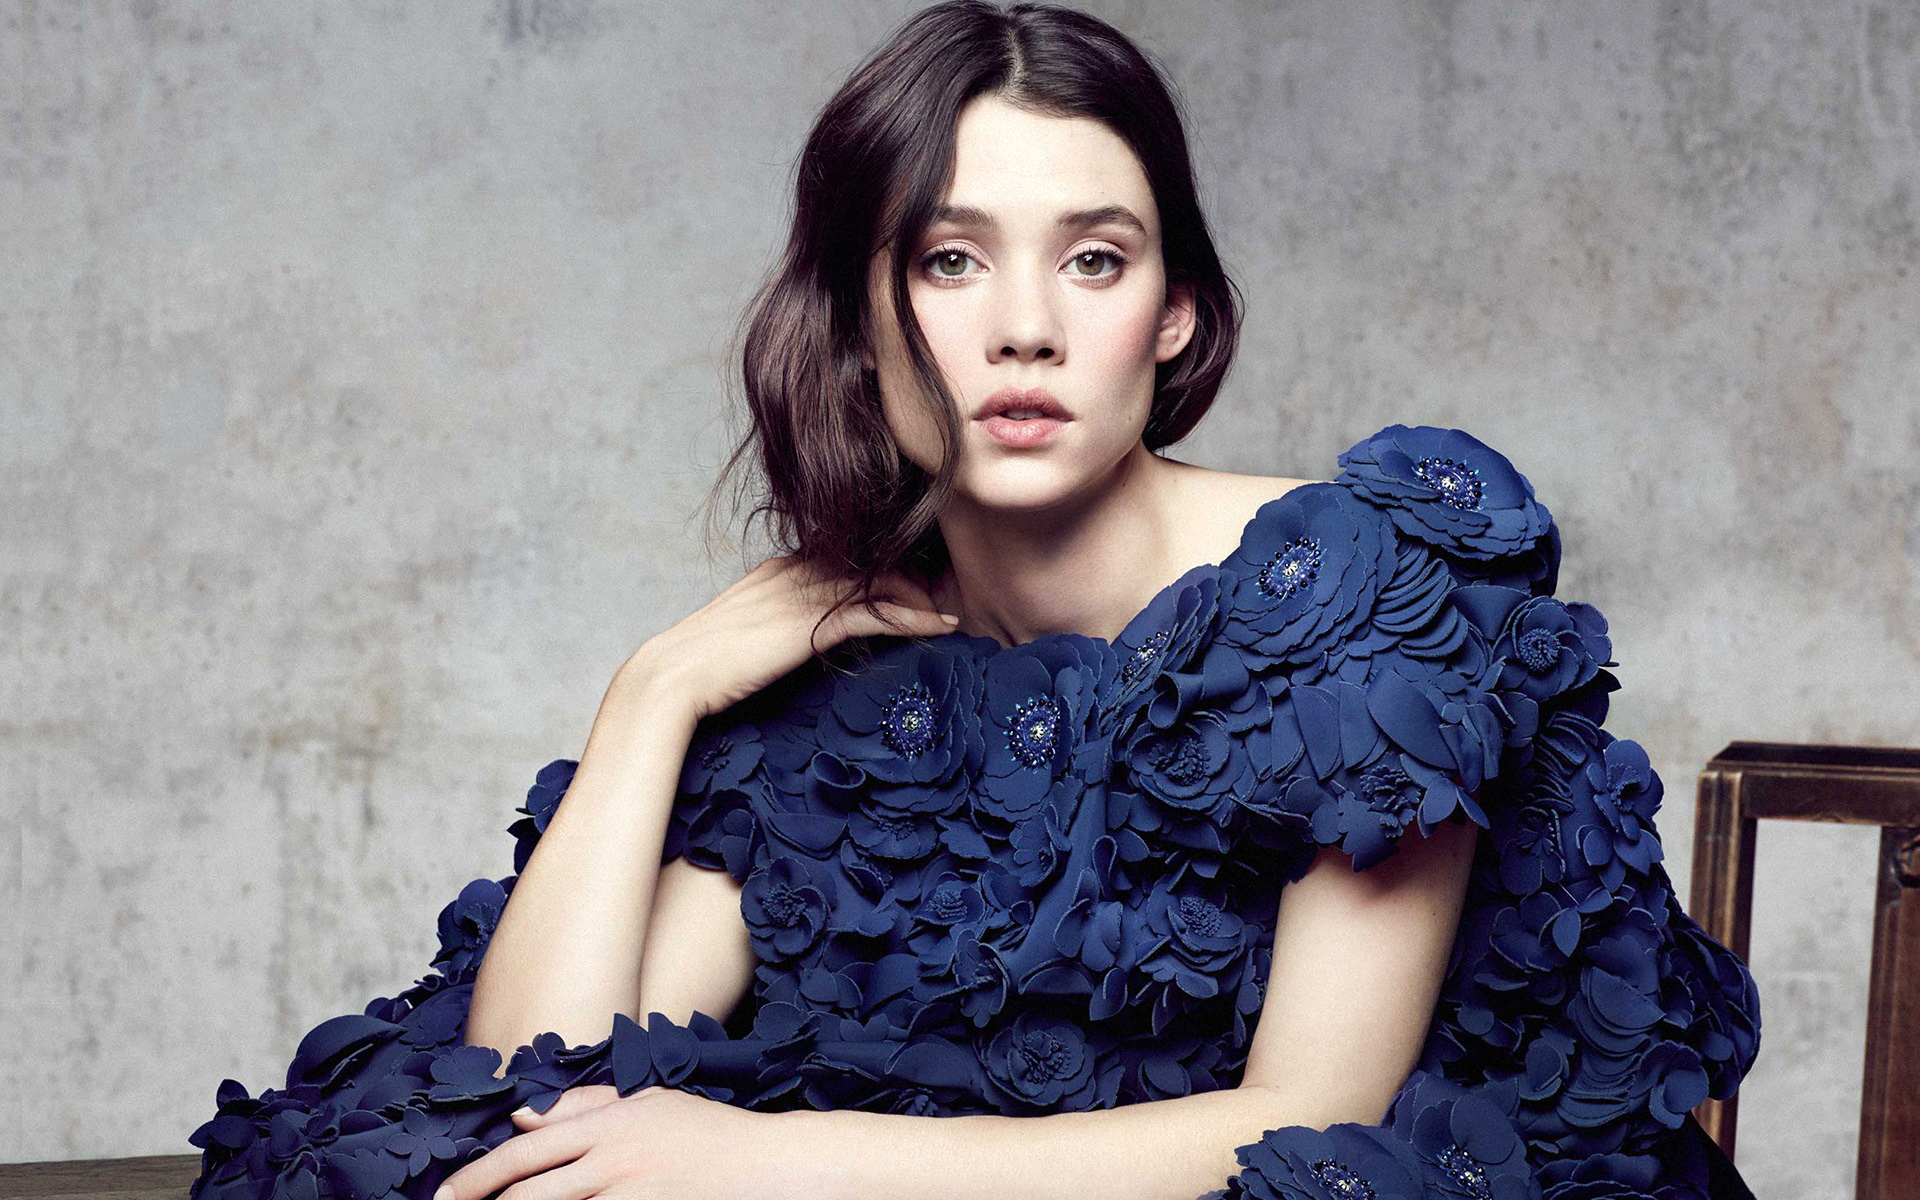 Astrid berges frisbey hd wallpaper